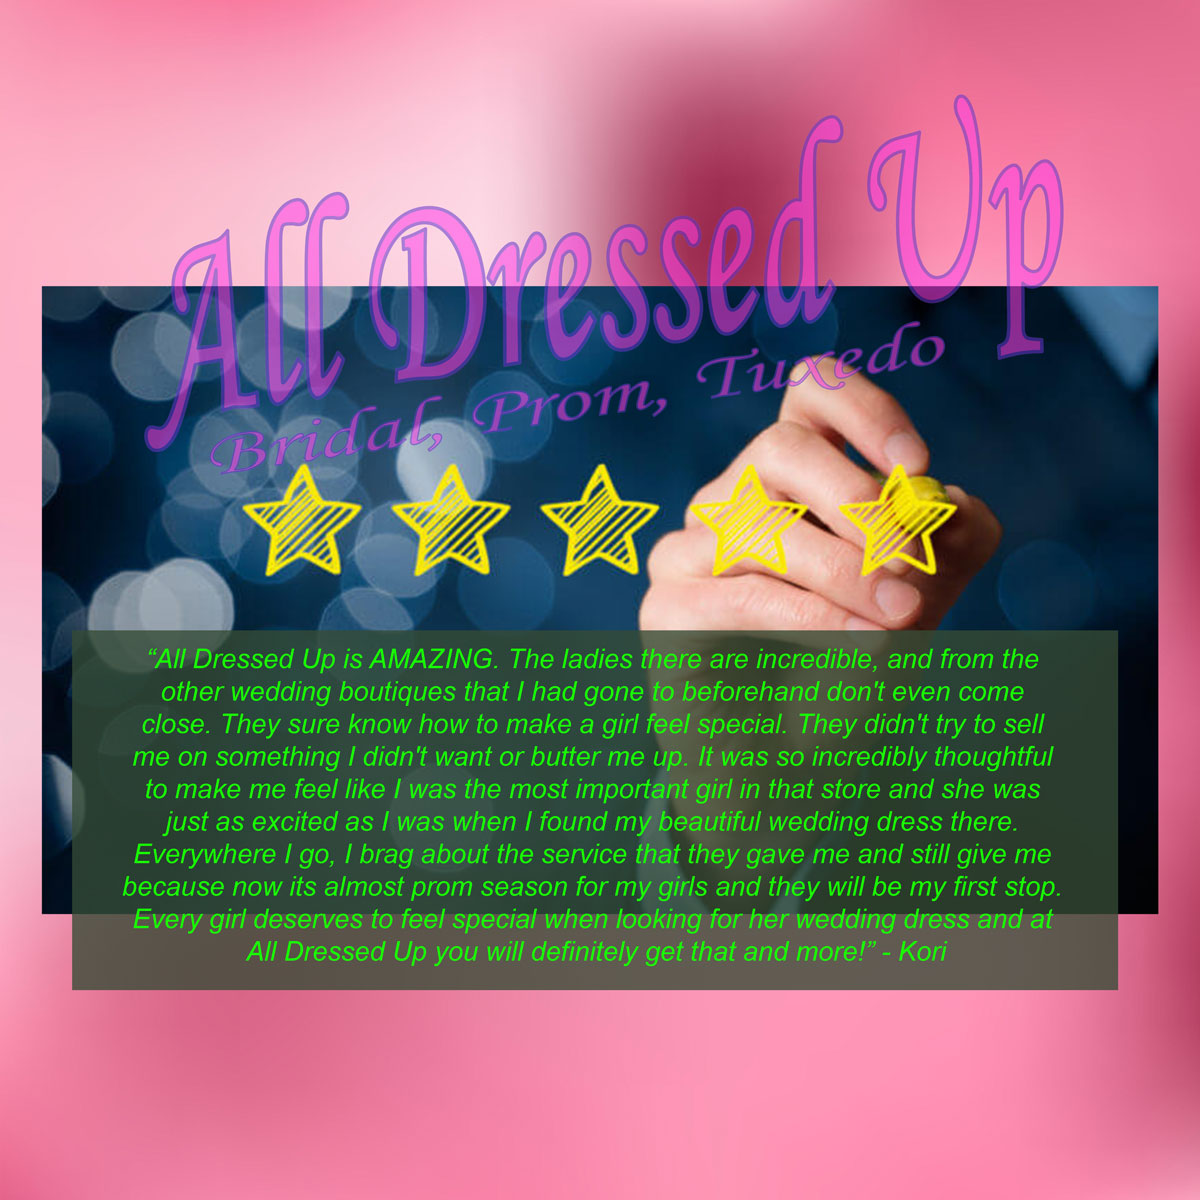 All Dressed Up Chattanooga, a 5-Star Review | Bridal Gowns, Prom Dresses, Bridesmaids, Tuxedo Rentals | Wedding